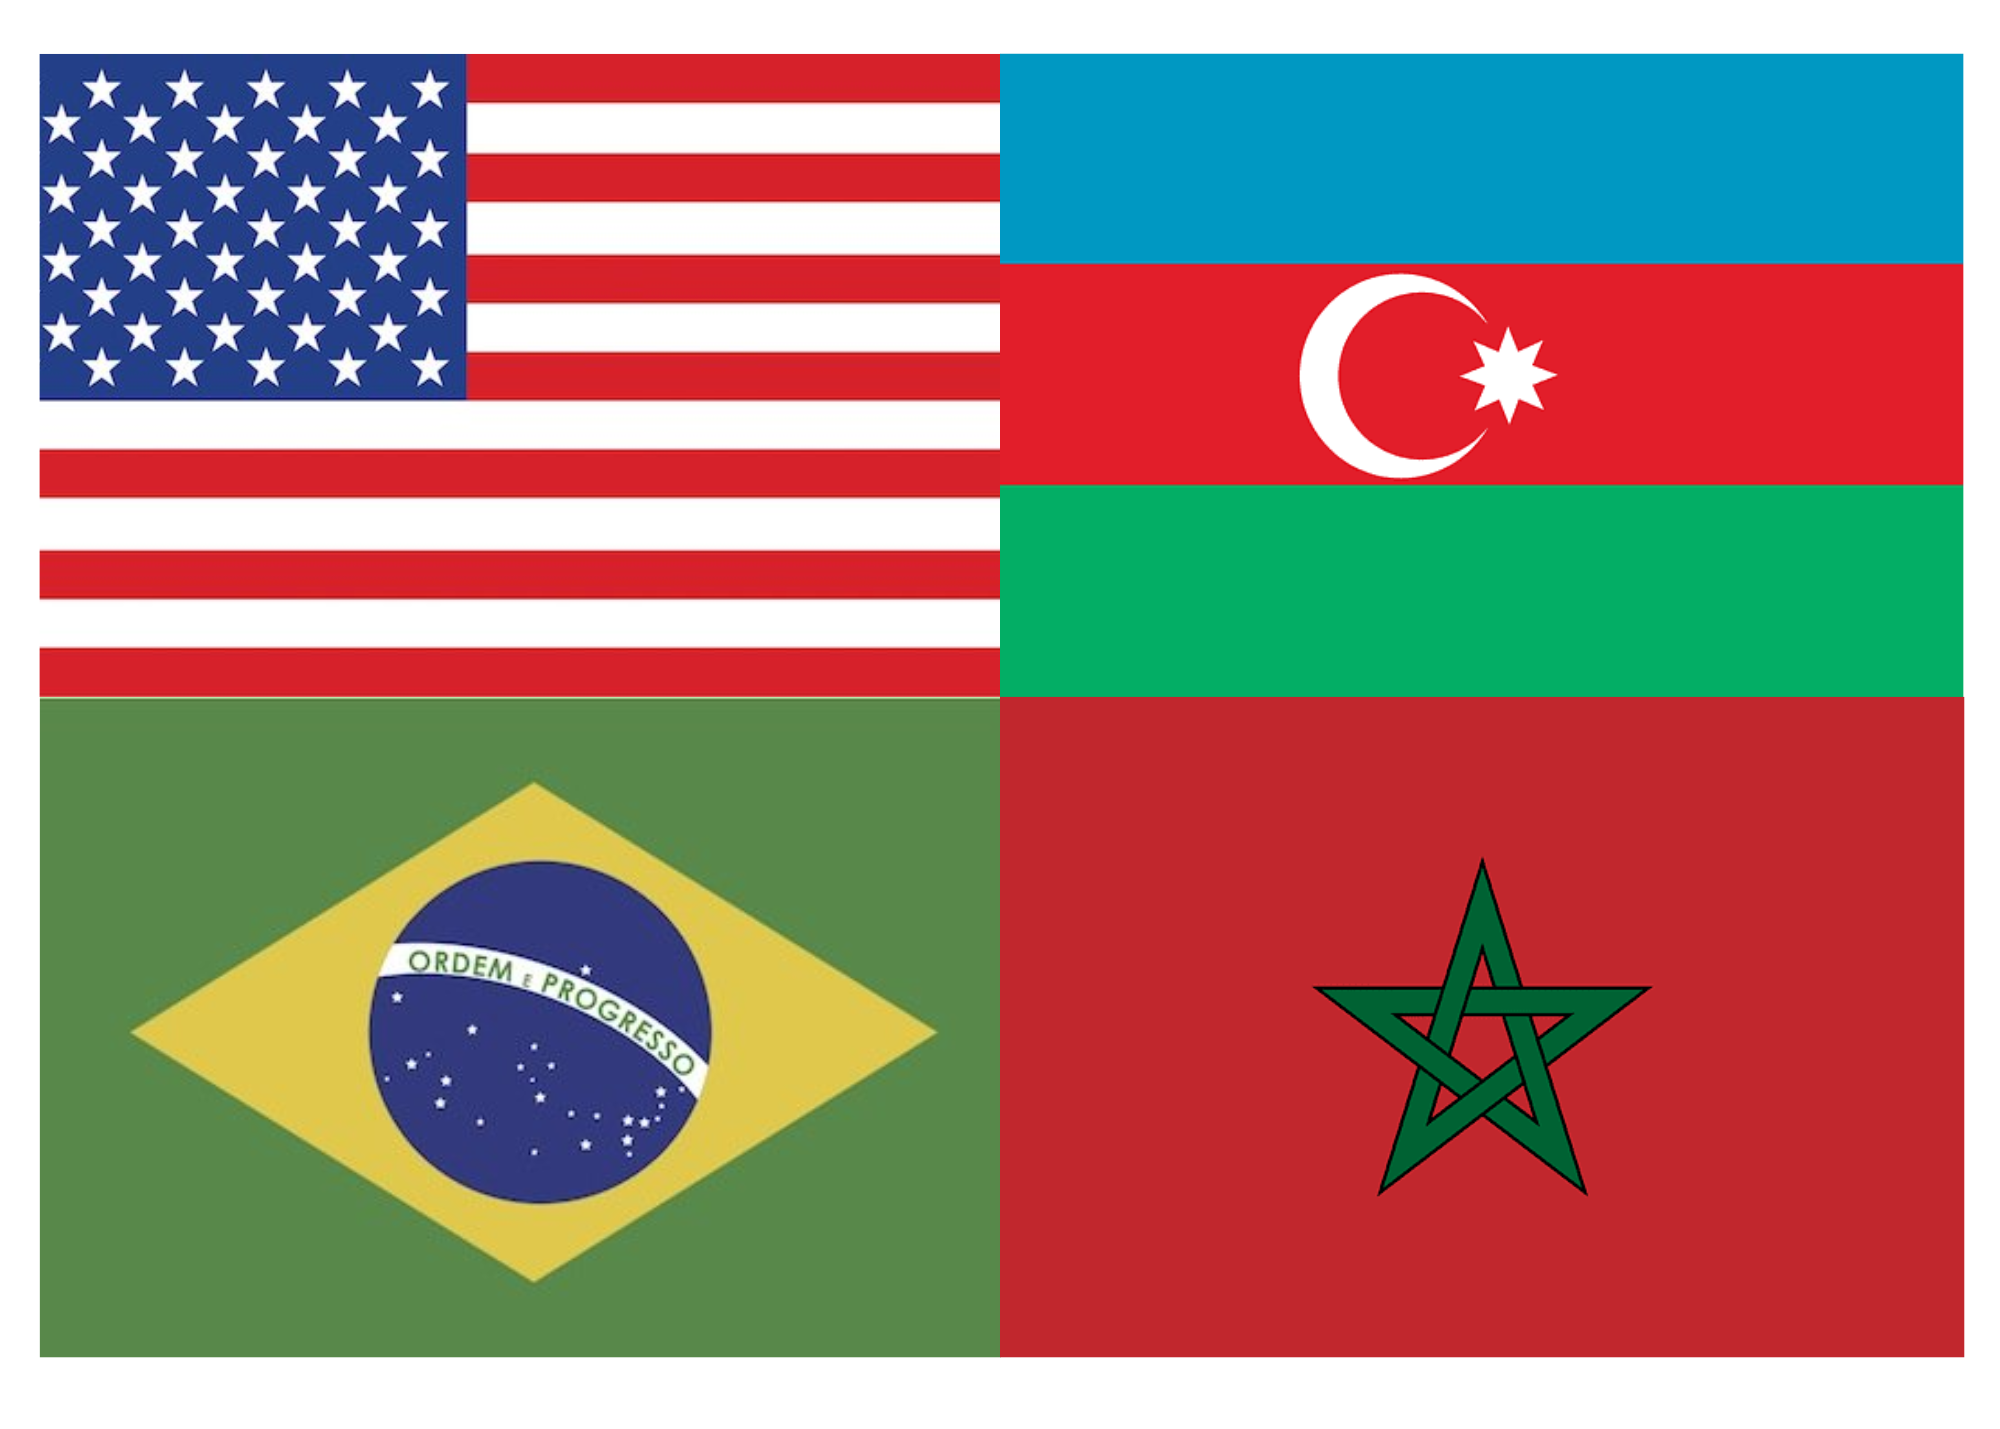 The four displayed state flags are United States, Azerbaijan, Brazil and Morocco